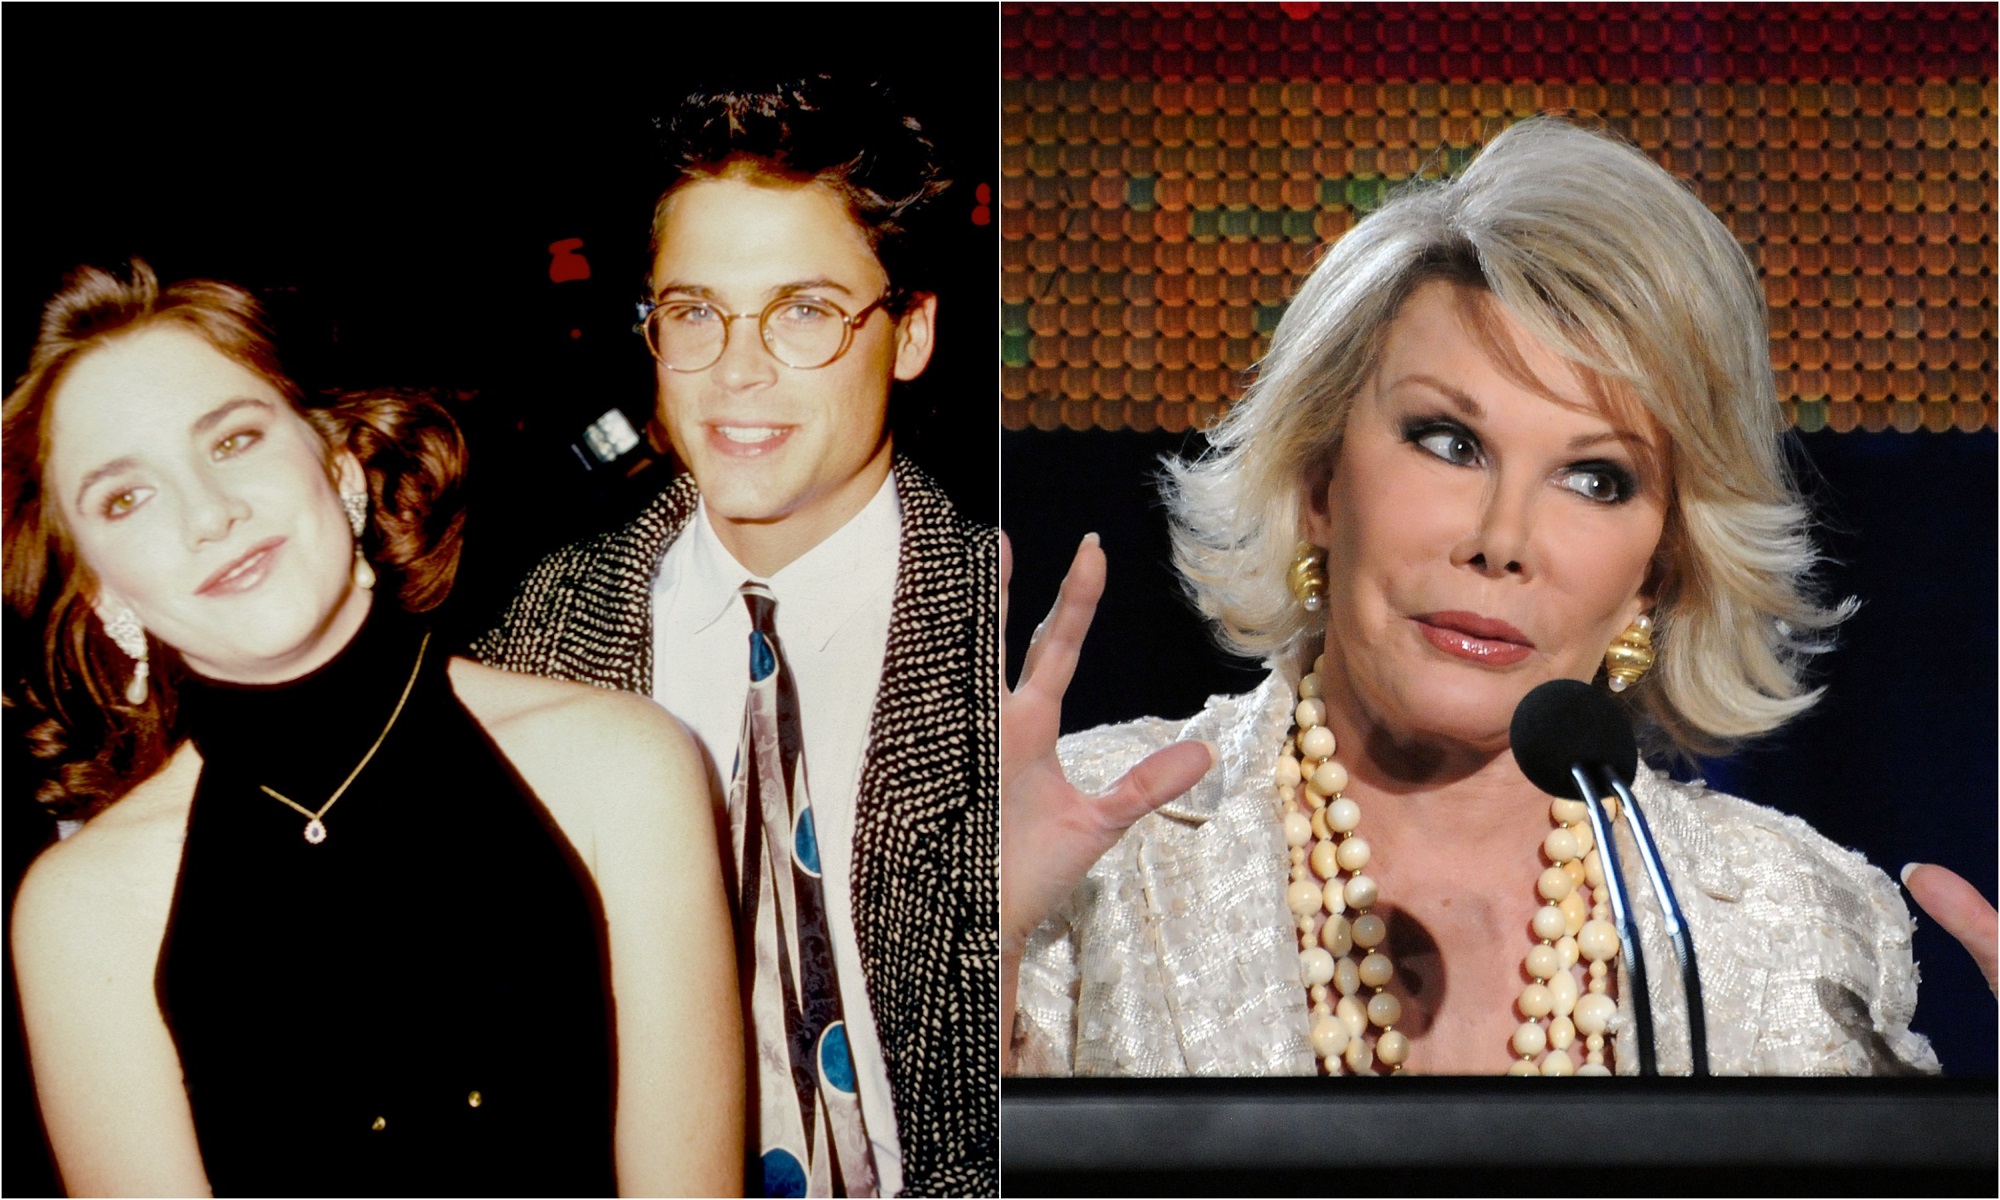 Melissa Gilbert and Rob Lowe together in the 1980s with a photo of Joan Rivers speaking in 2009